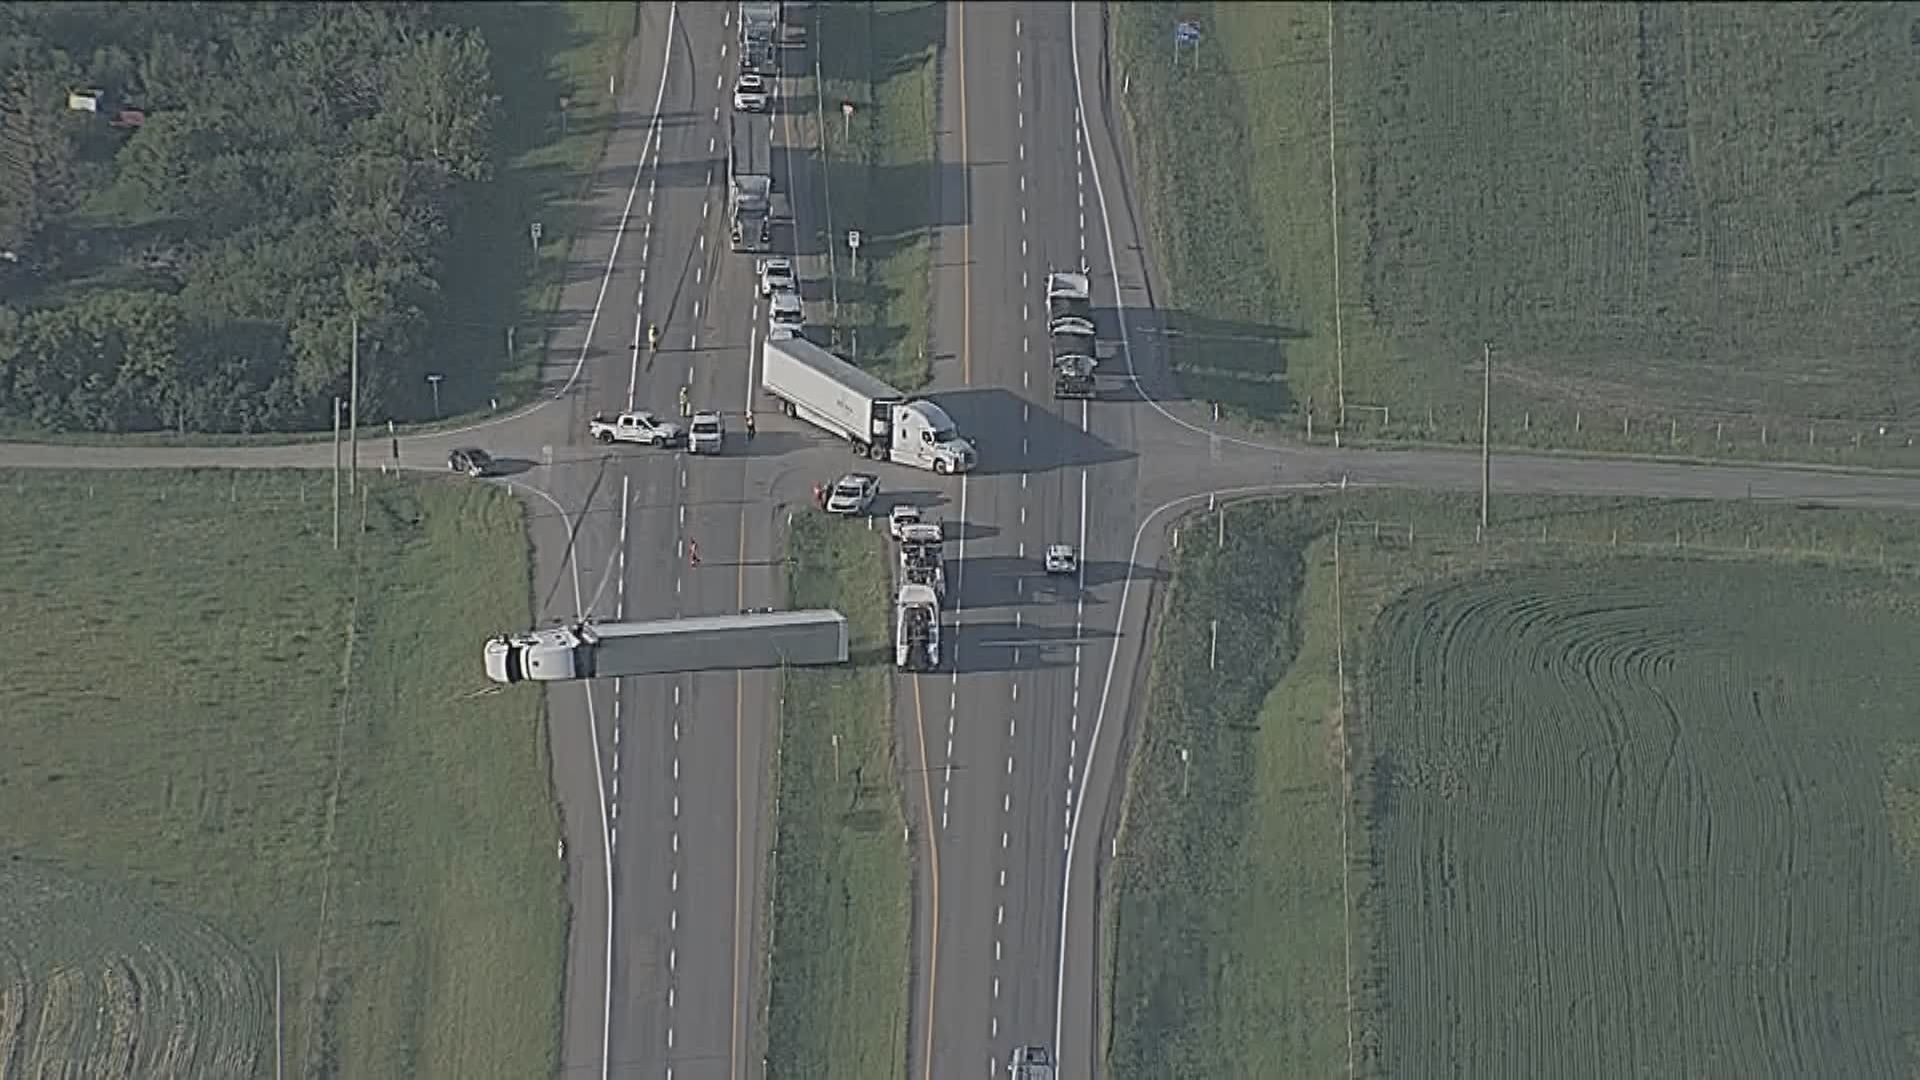 Rolled over semi-truck on Highway 2 causes delays: High River